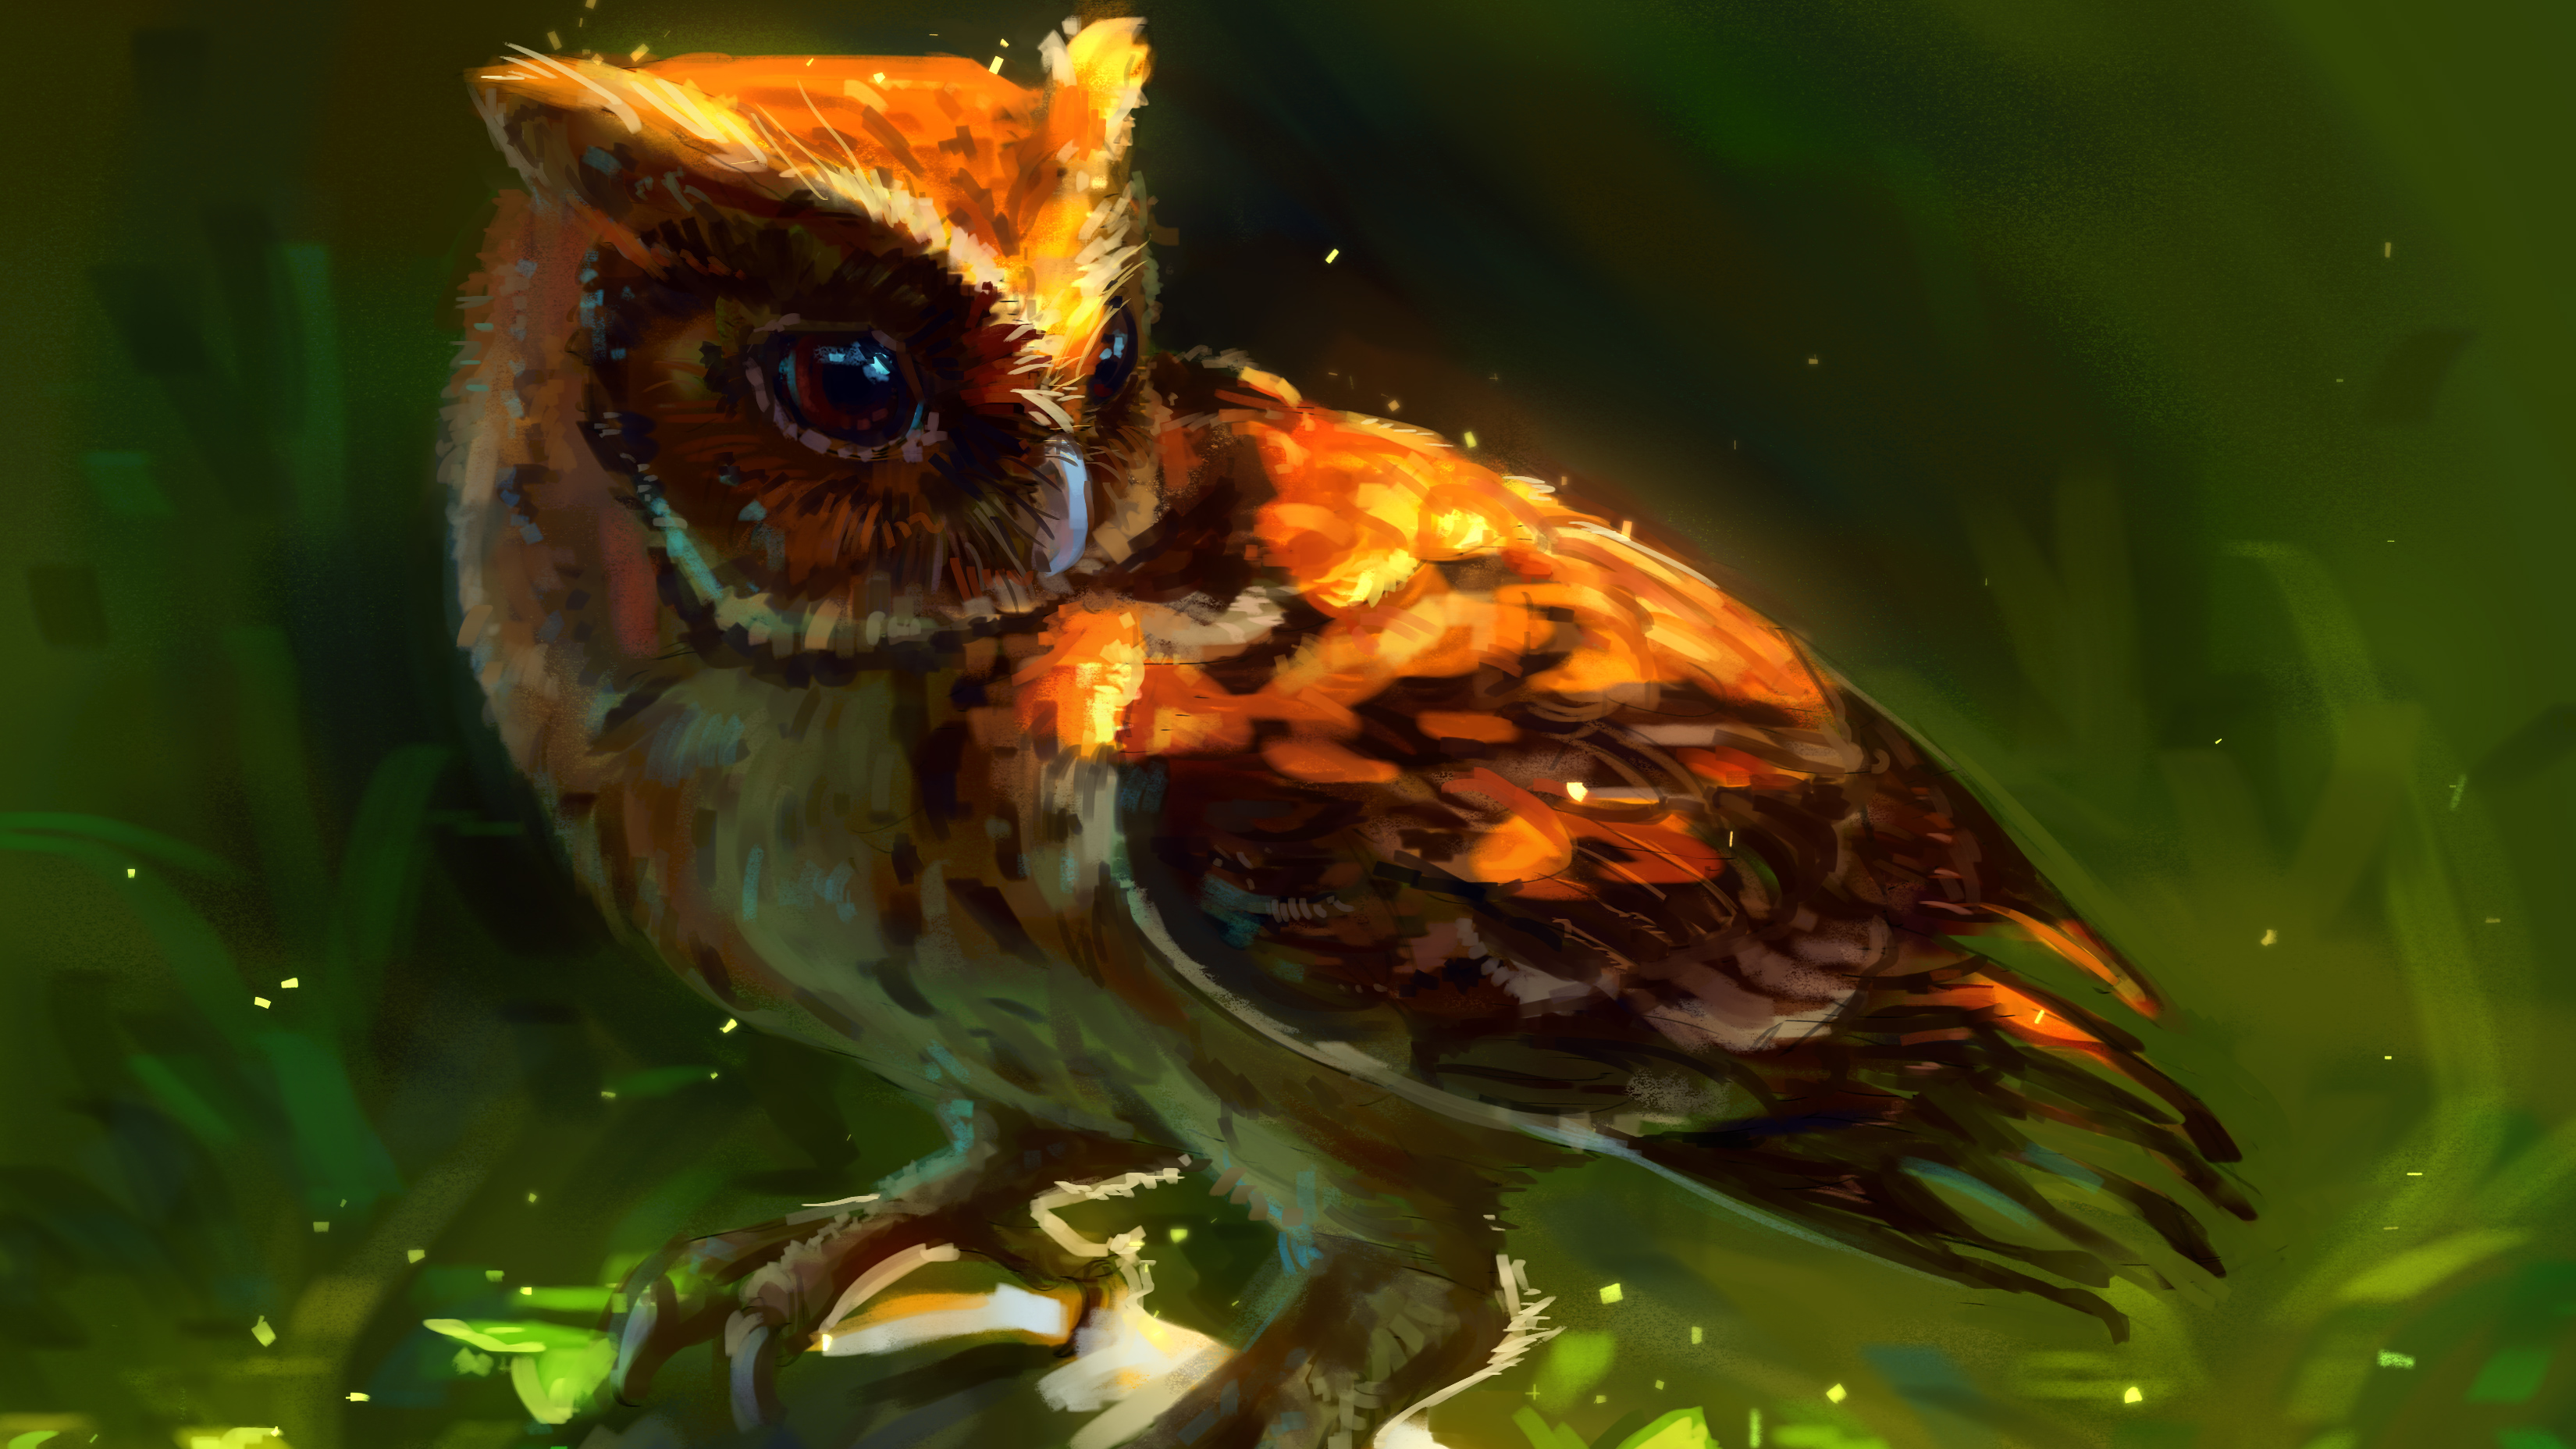 2932x2932 Owl Arts Ipad Pro Retina Display HD 4k Wallpapers, Images,  Backgrounds, Photos and Pictures